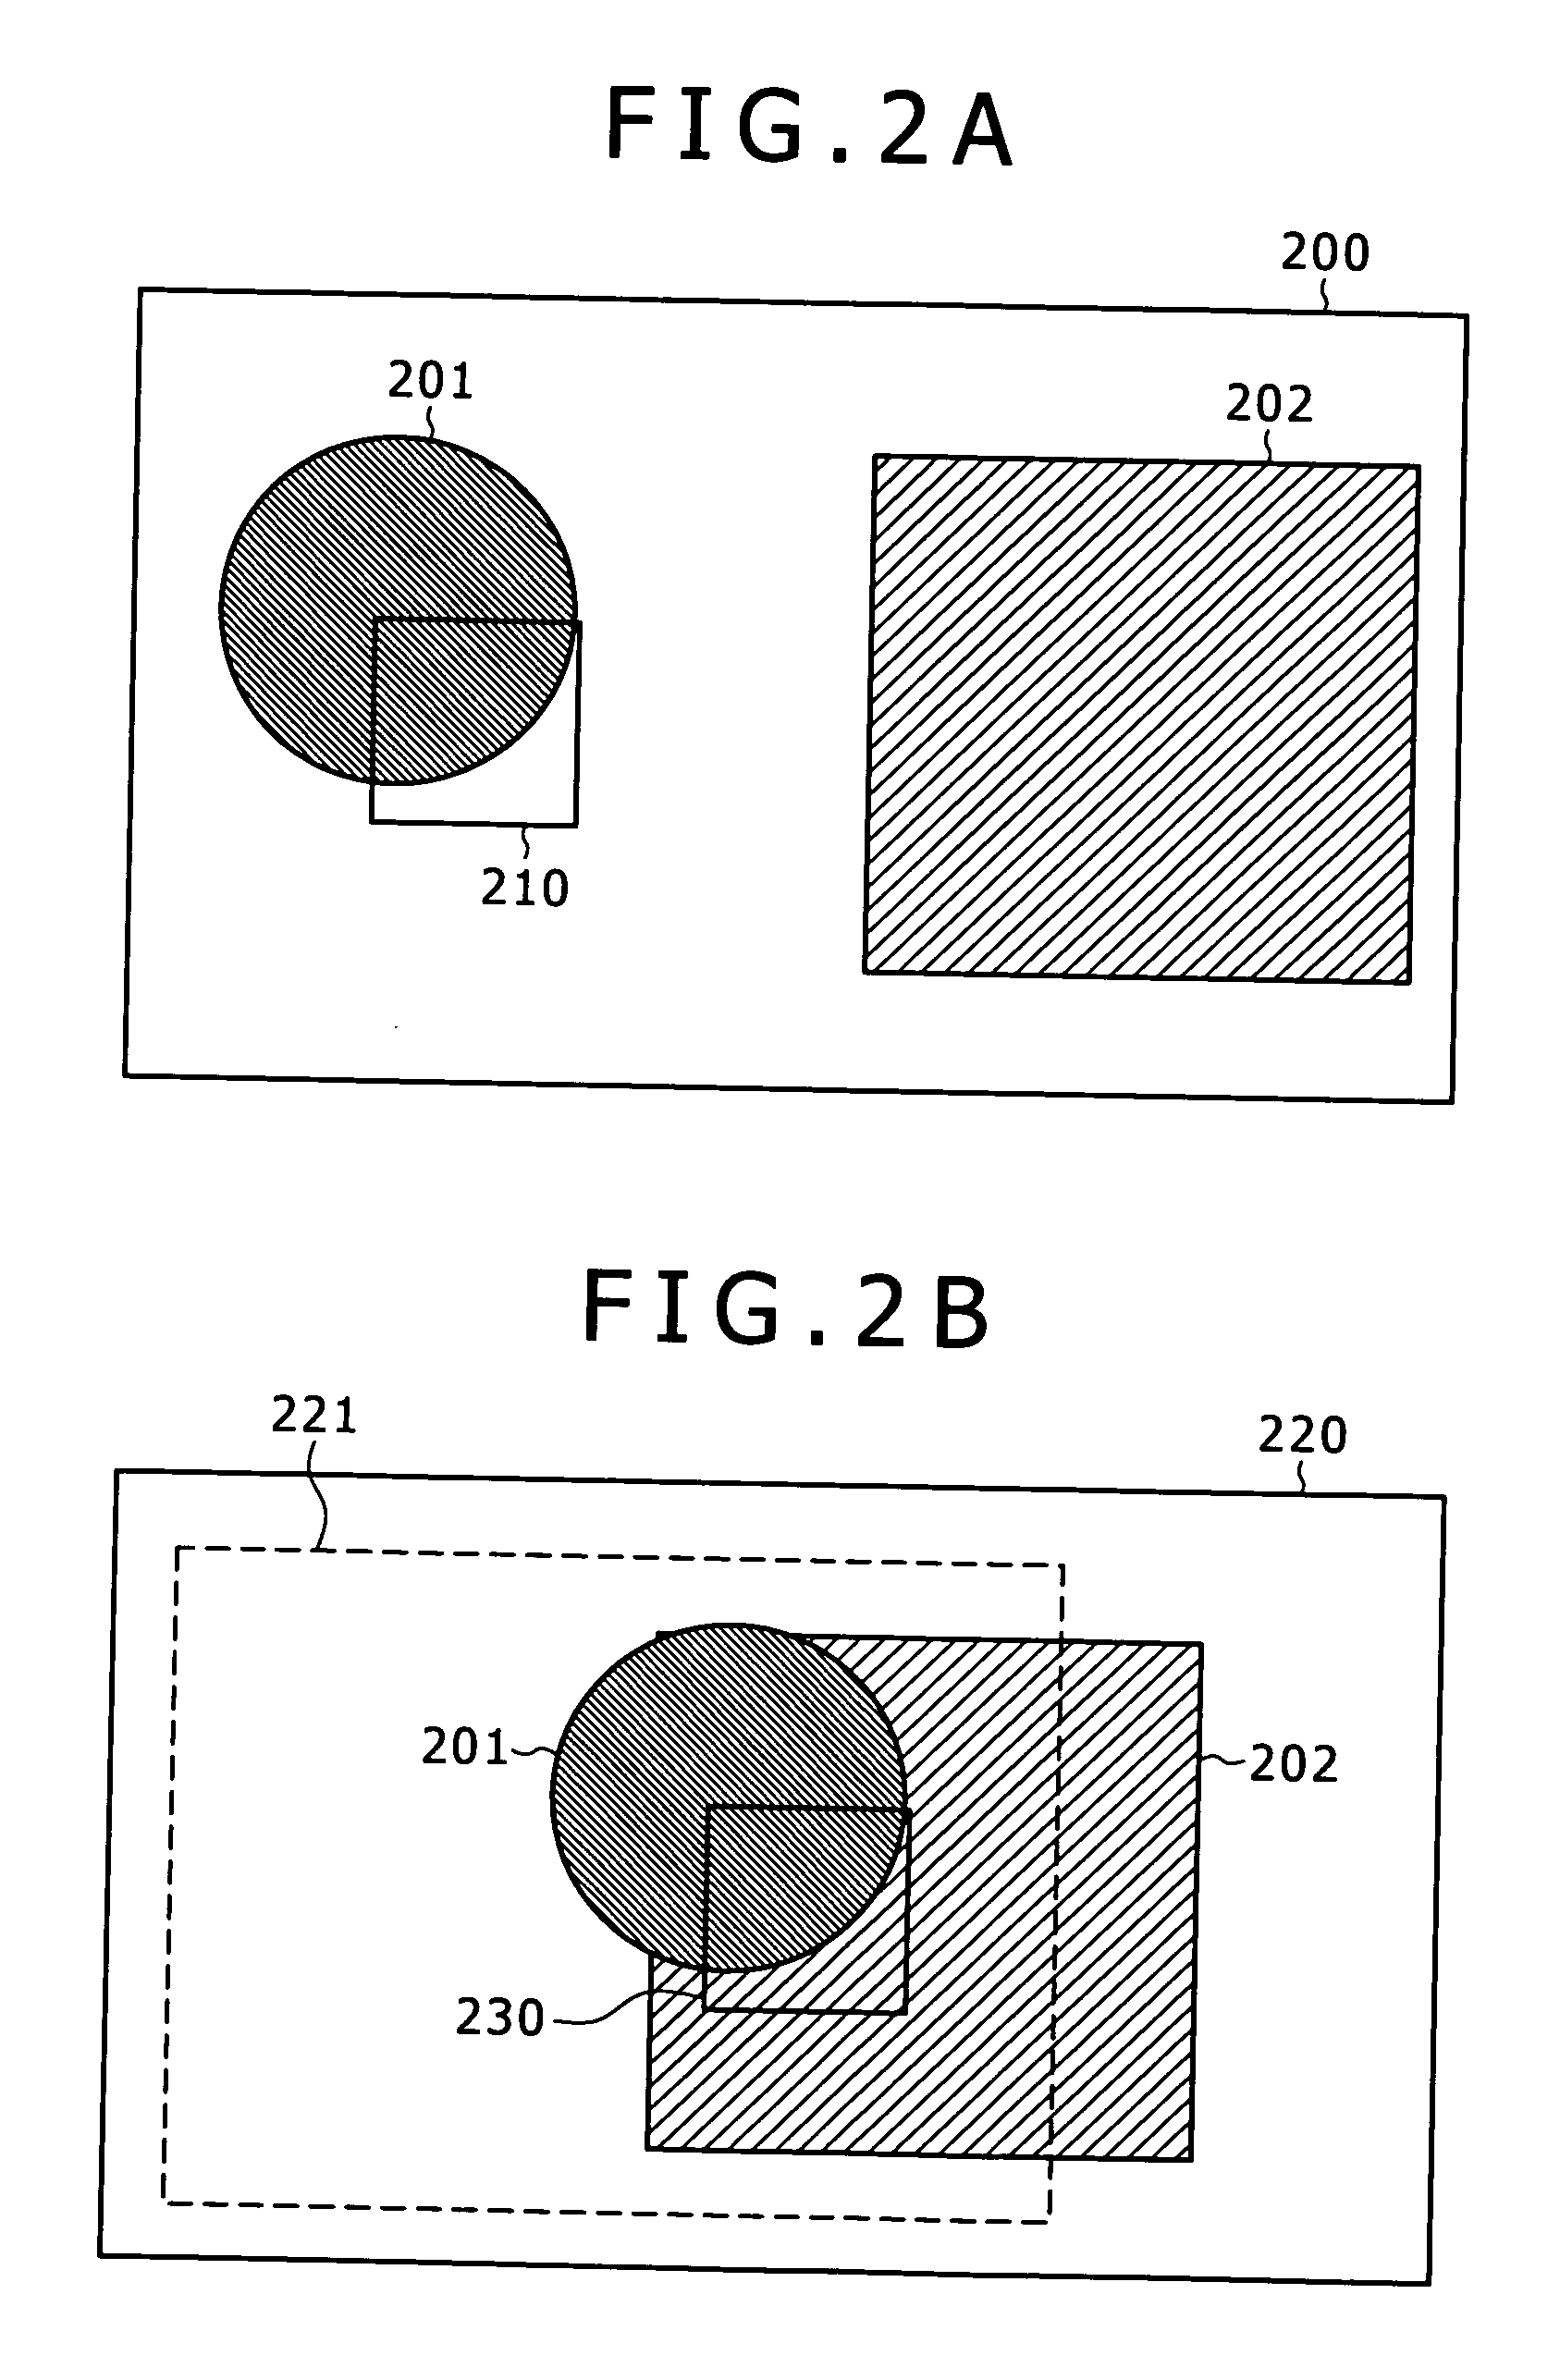 Motion vector detection apparatus, motion vector processing method and program